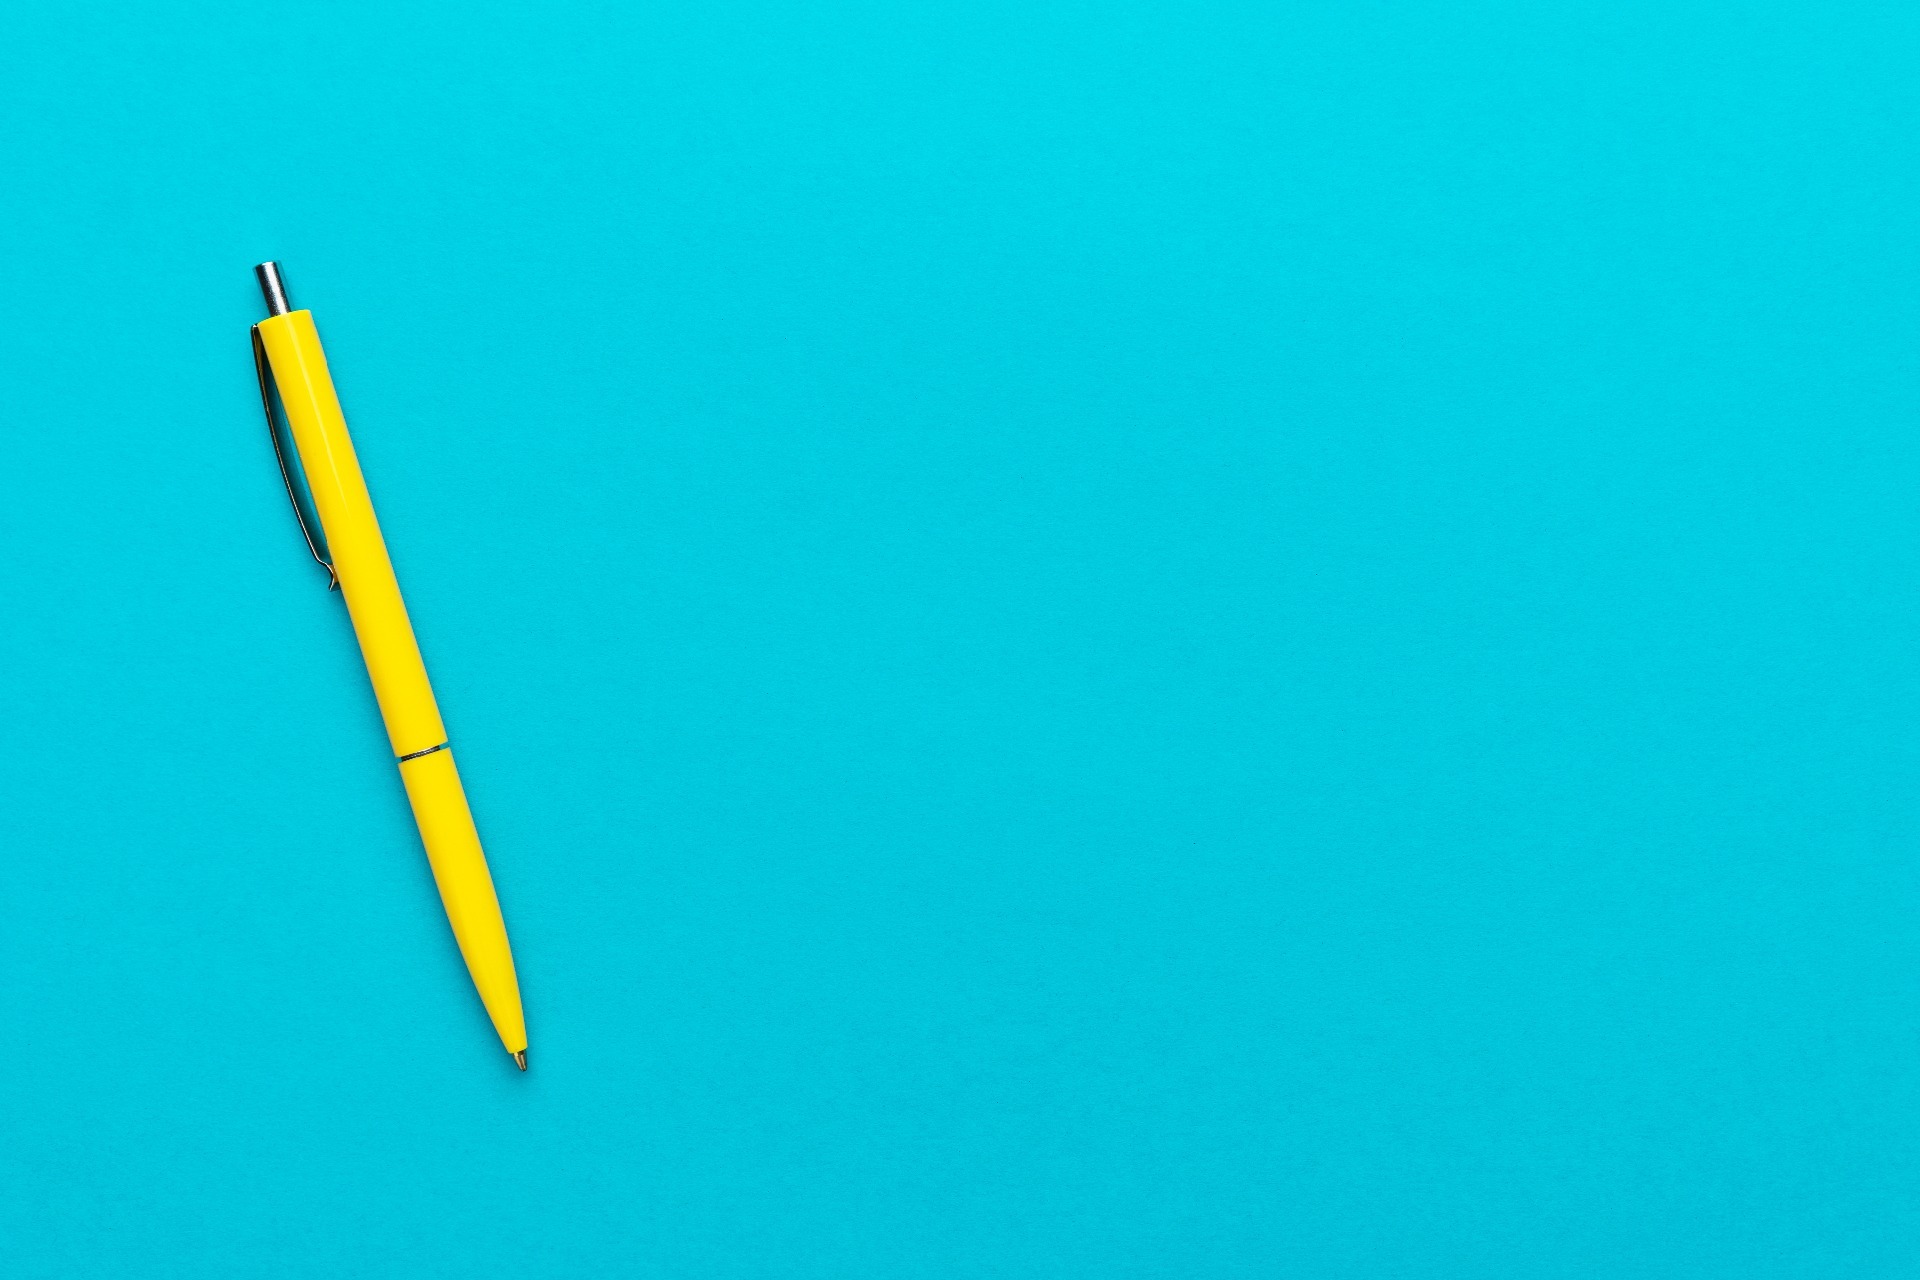 A bright yellow pen against a blue background.